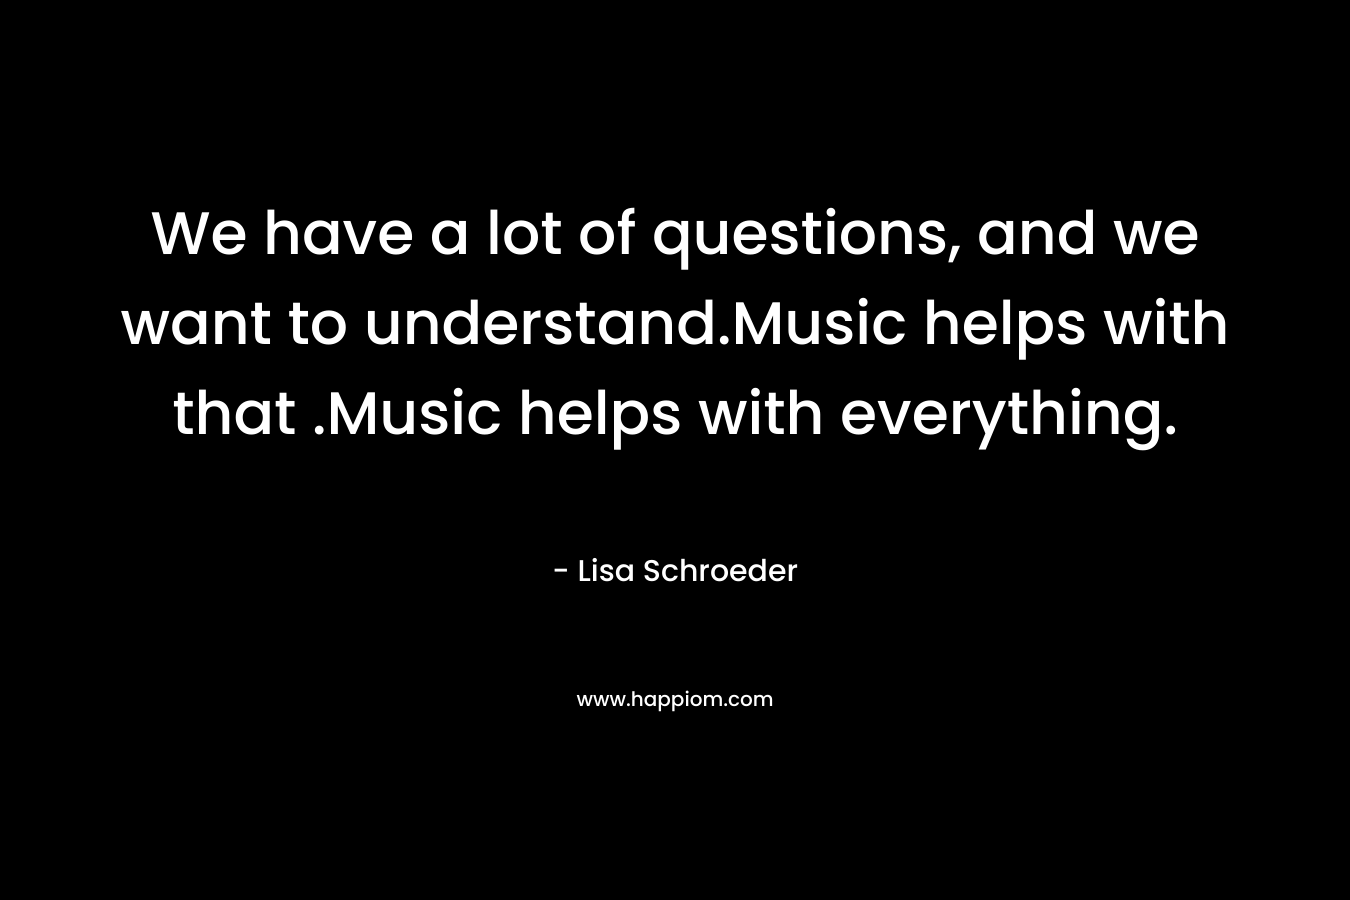 We have a lot of questions, and we want to understand.Music helps with that .Music helps with everything.